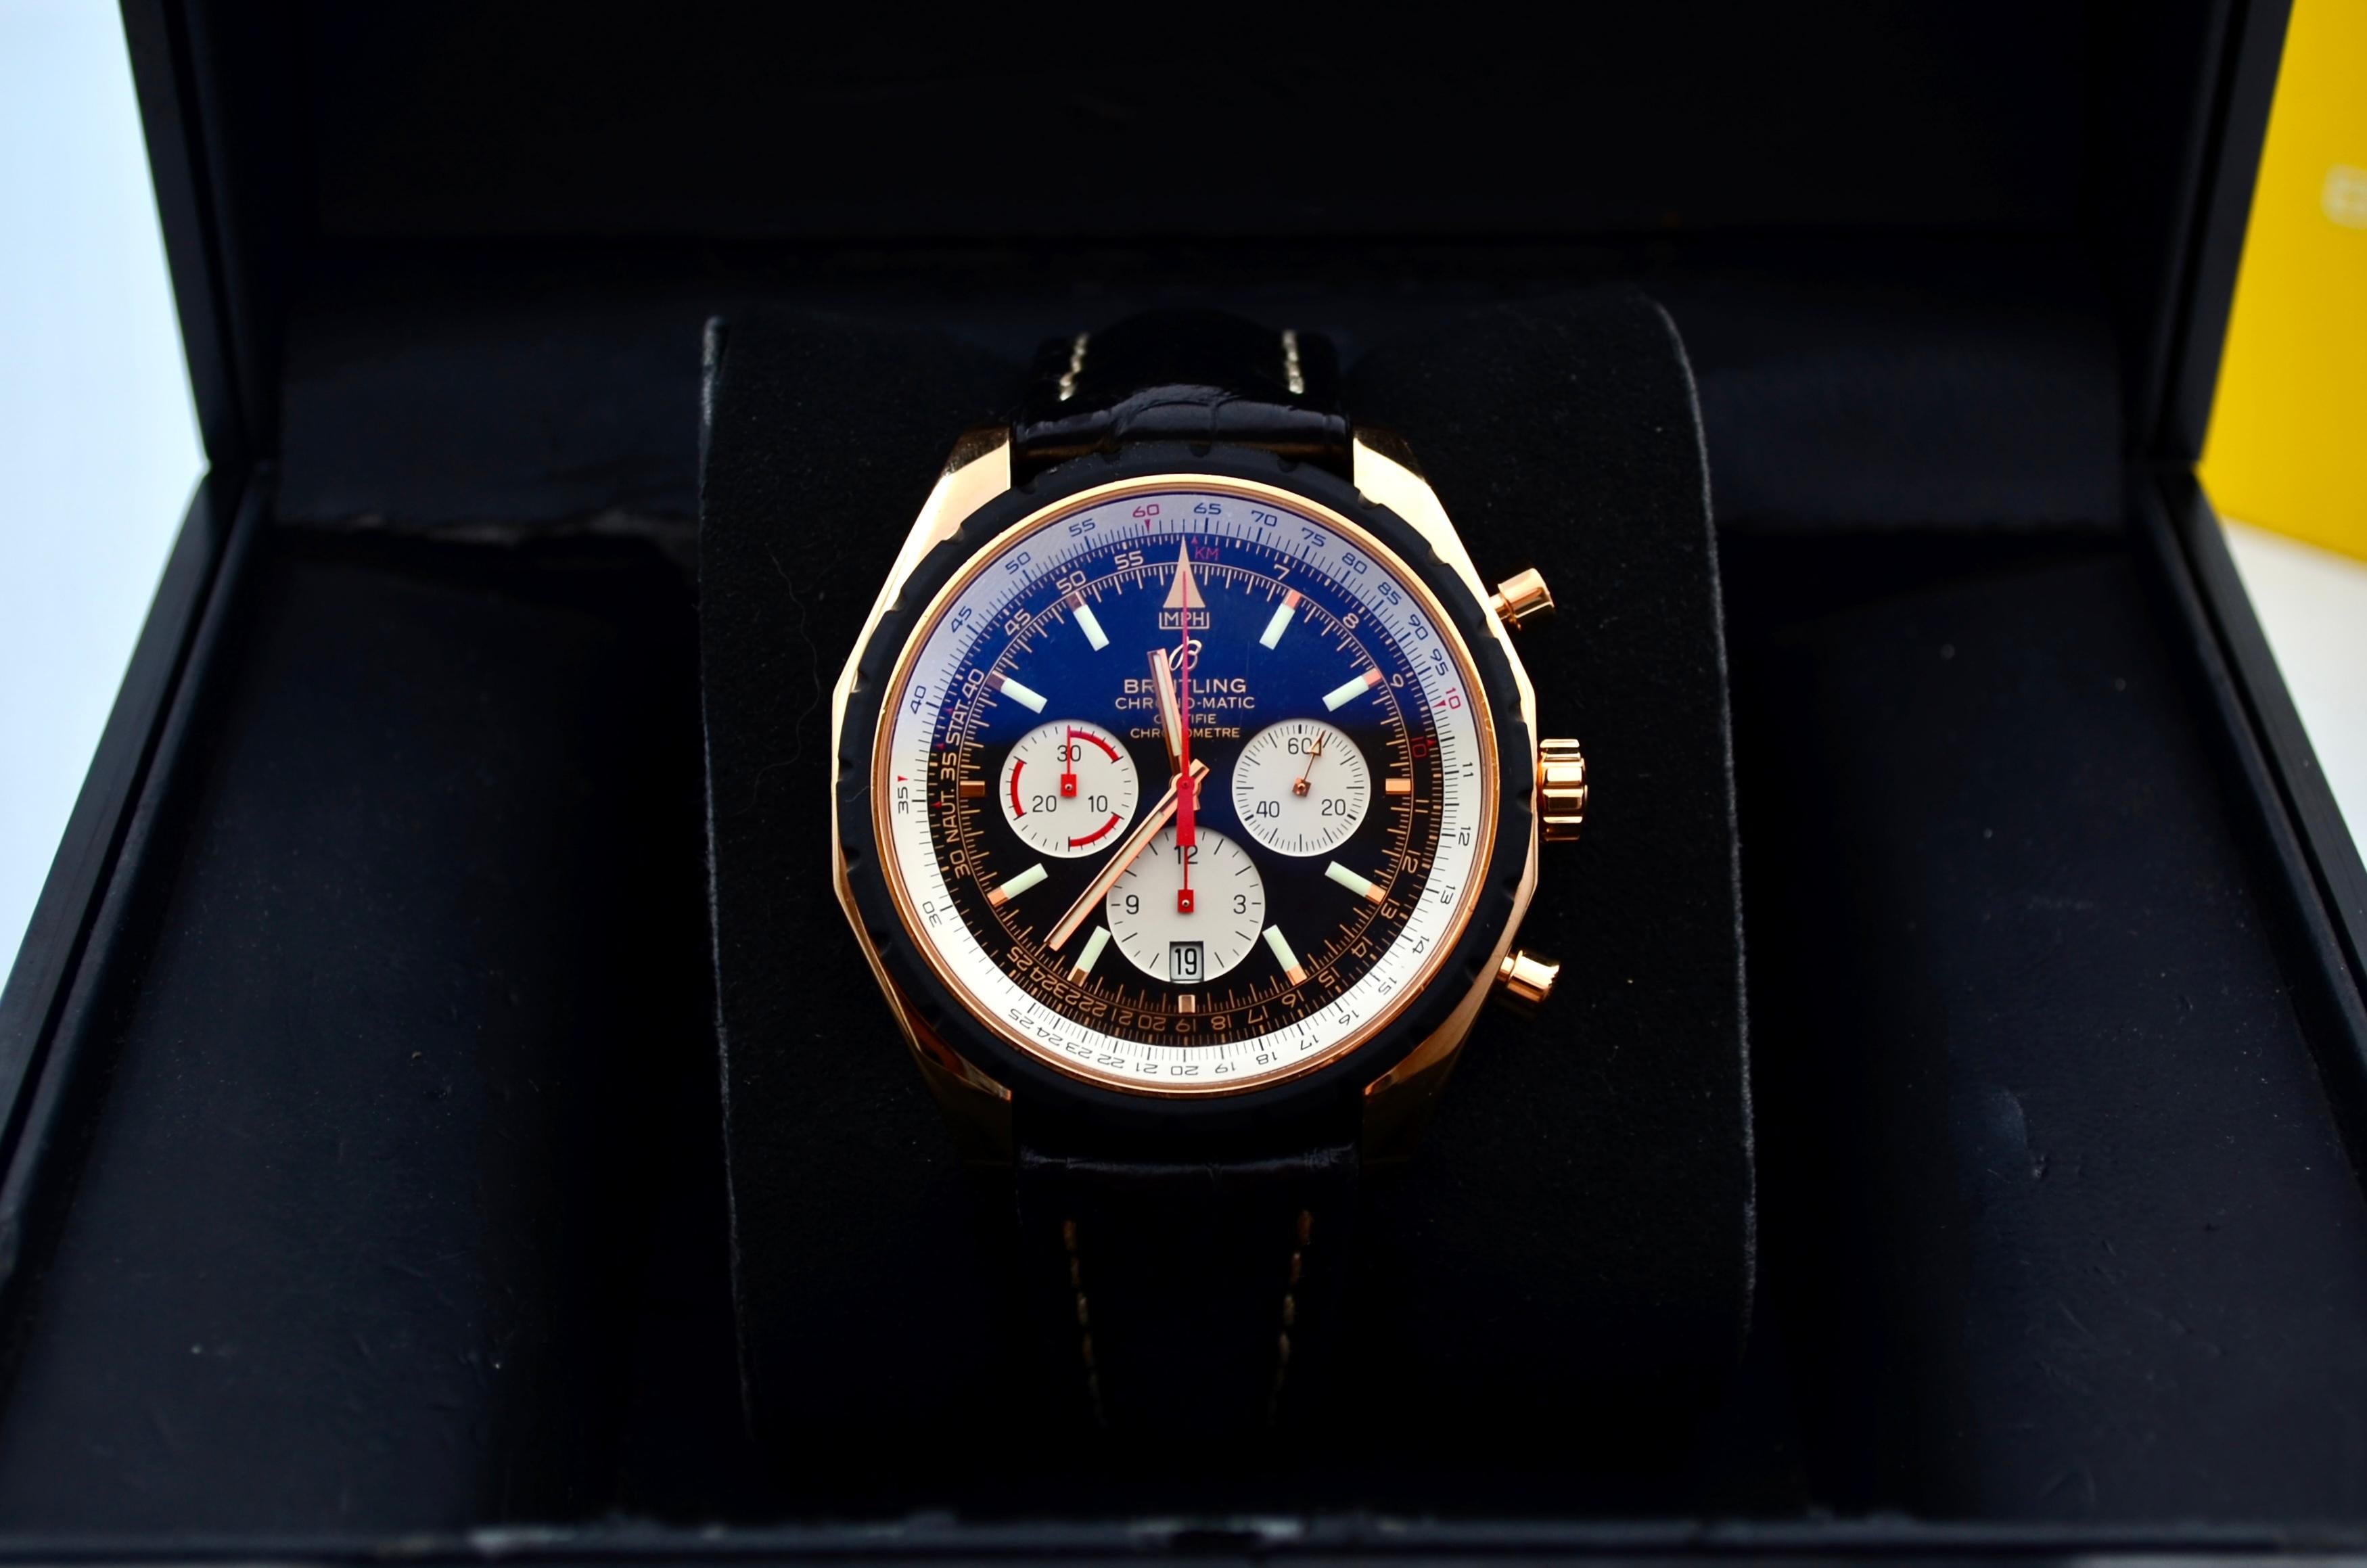 The Breitling Chrono-matic 49mm Navitimer Gold Limited Edition (Reference R1436002) is a distinctive and luxurious wristwatch produced by the Swiss watchmaker Breitling.  This watch features a case made of gold. The use of gold contributes to the